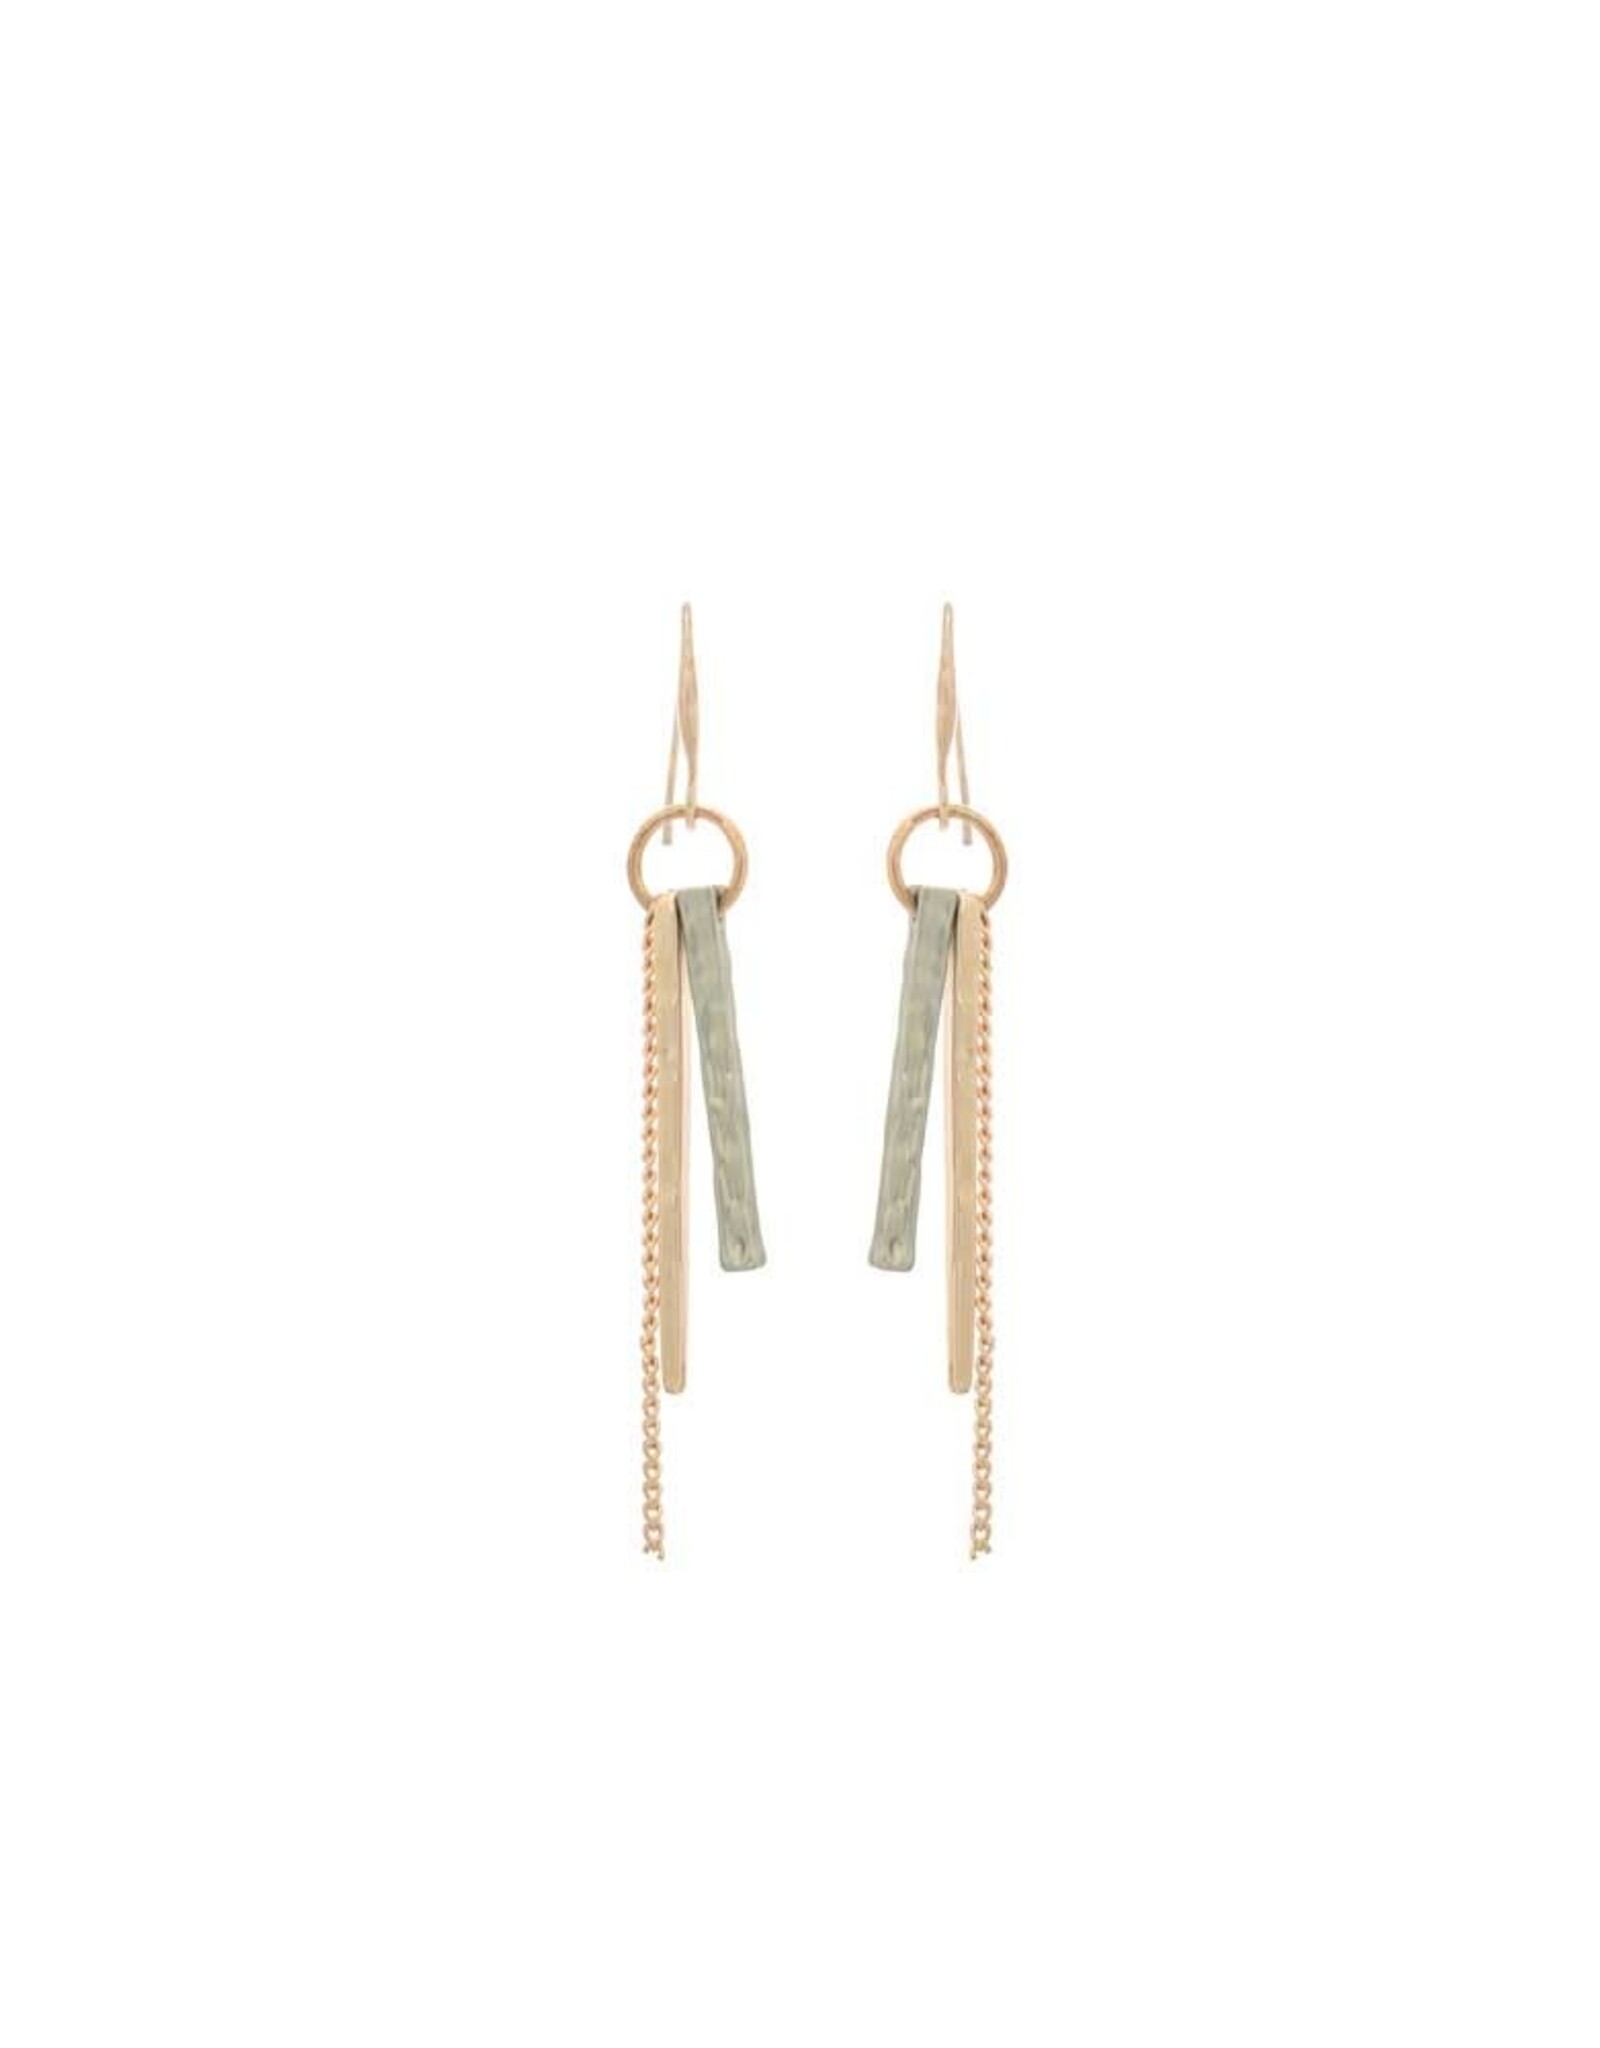 Merx Inc. Long Stick and Chain Earrings Gold